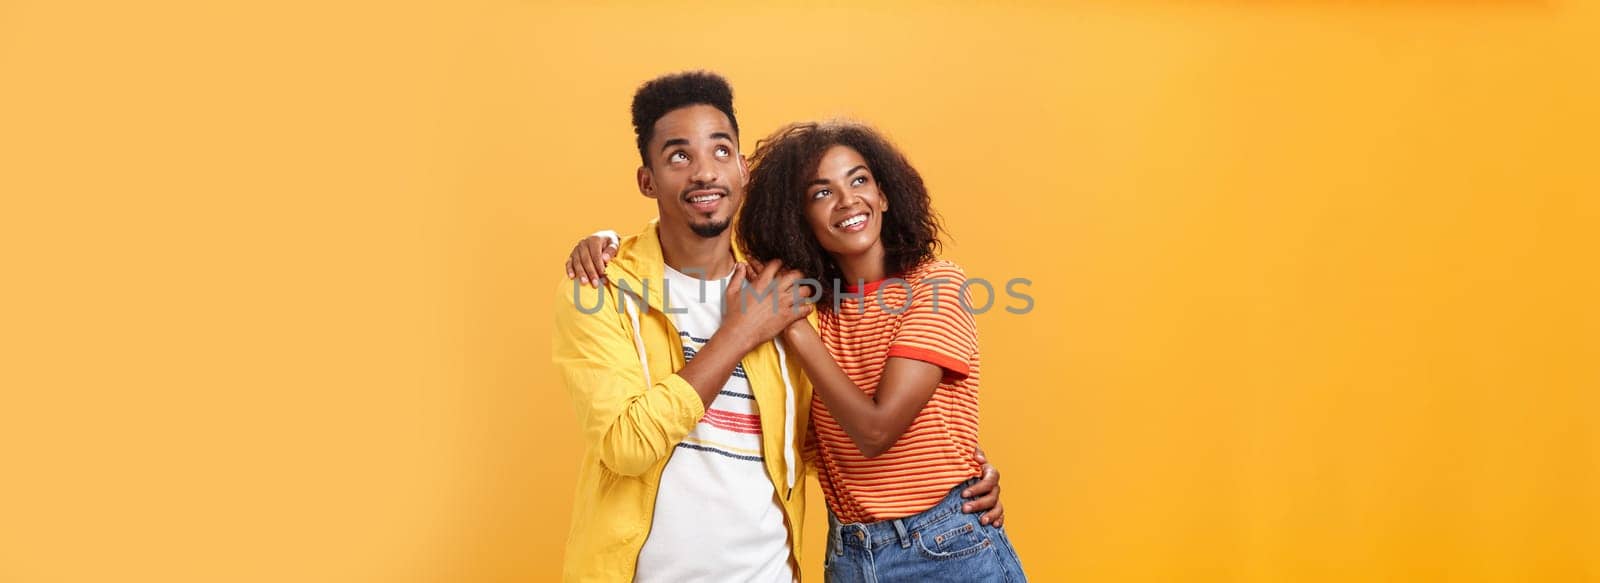 Couple of lovers enjoying spending warm summer evening together gazing up at stars with happy. enthusiastic expression being in love hugging and expressing warm romantic feelings over orange wall.